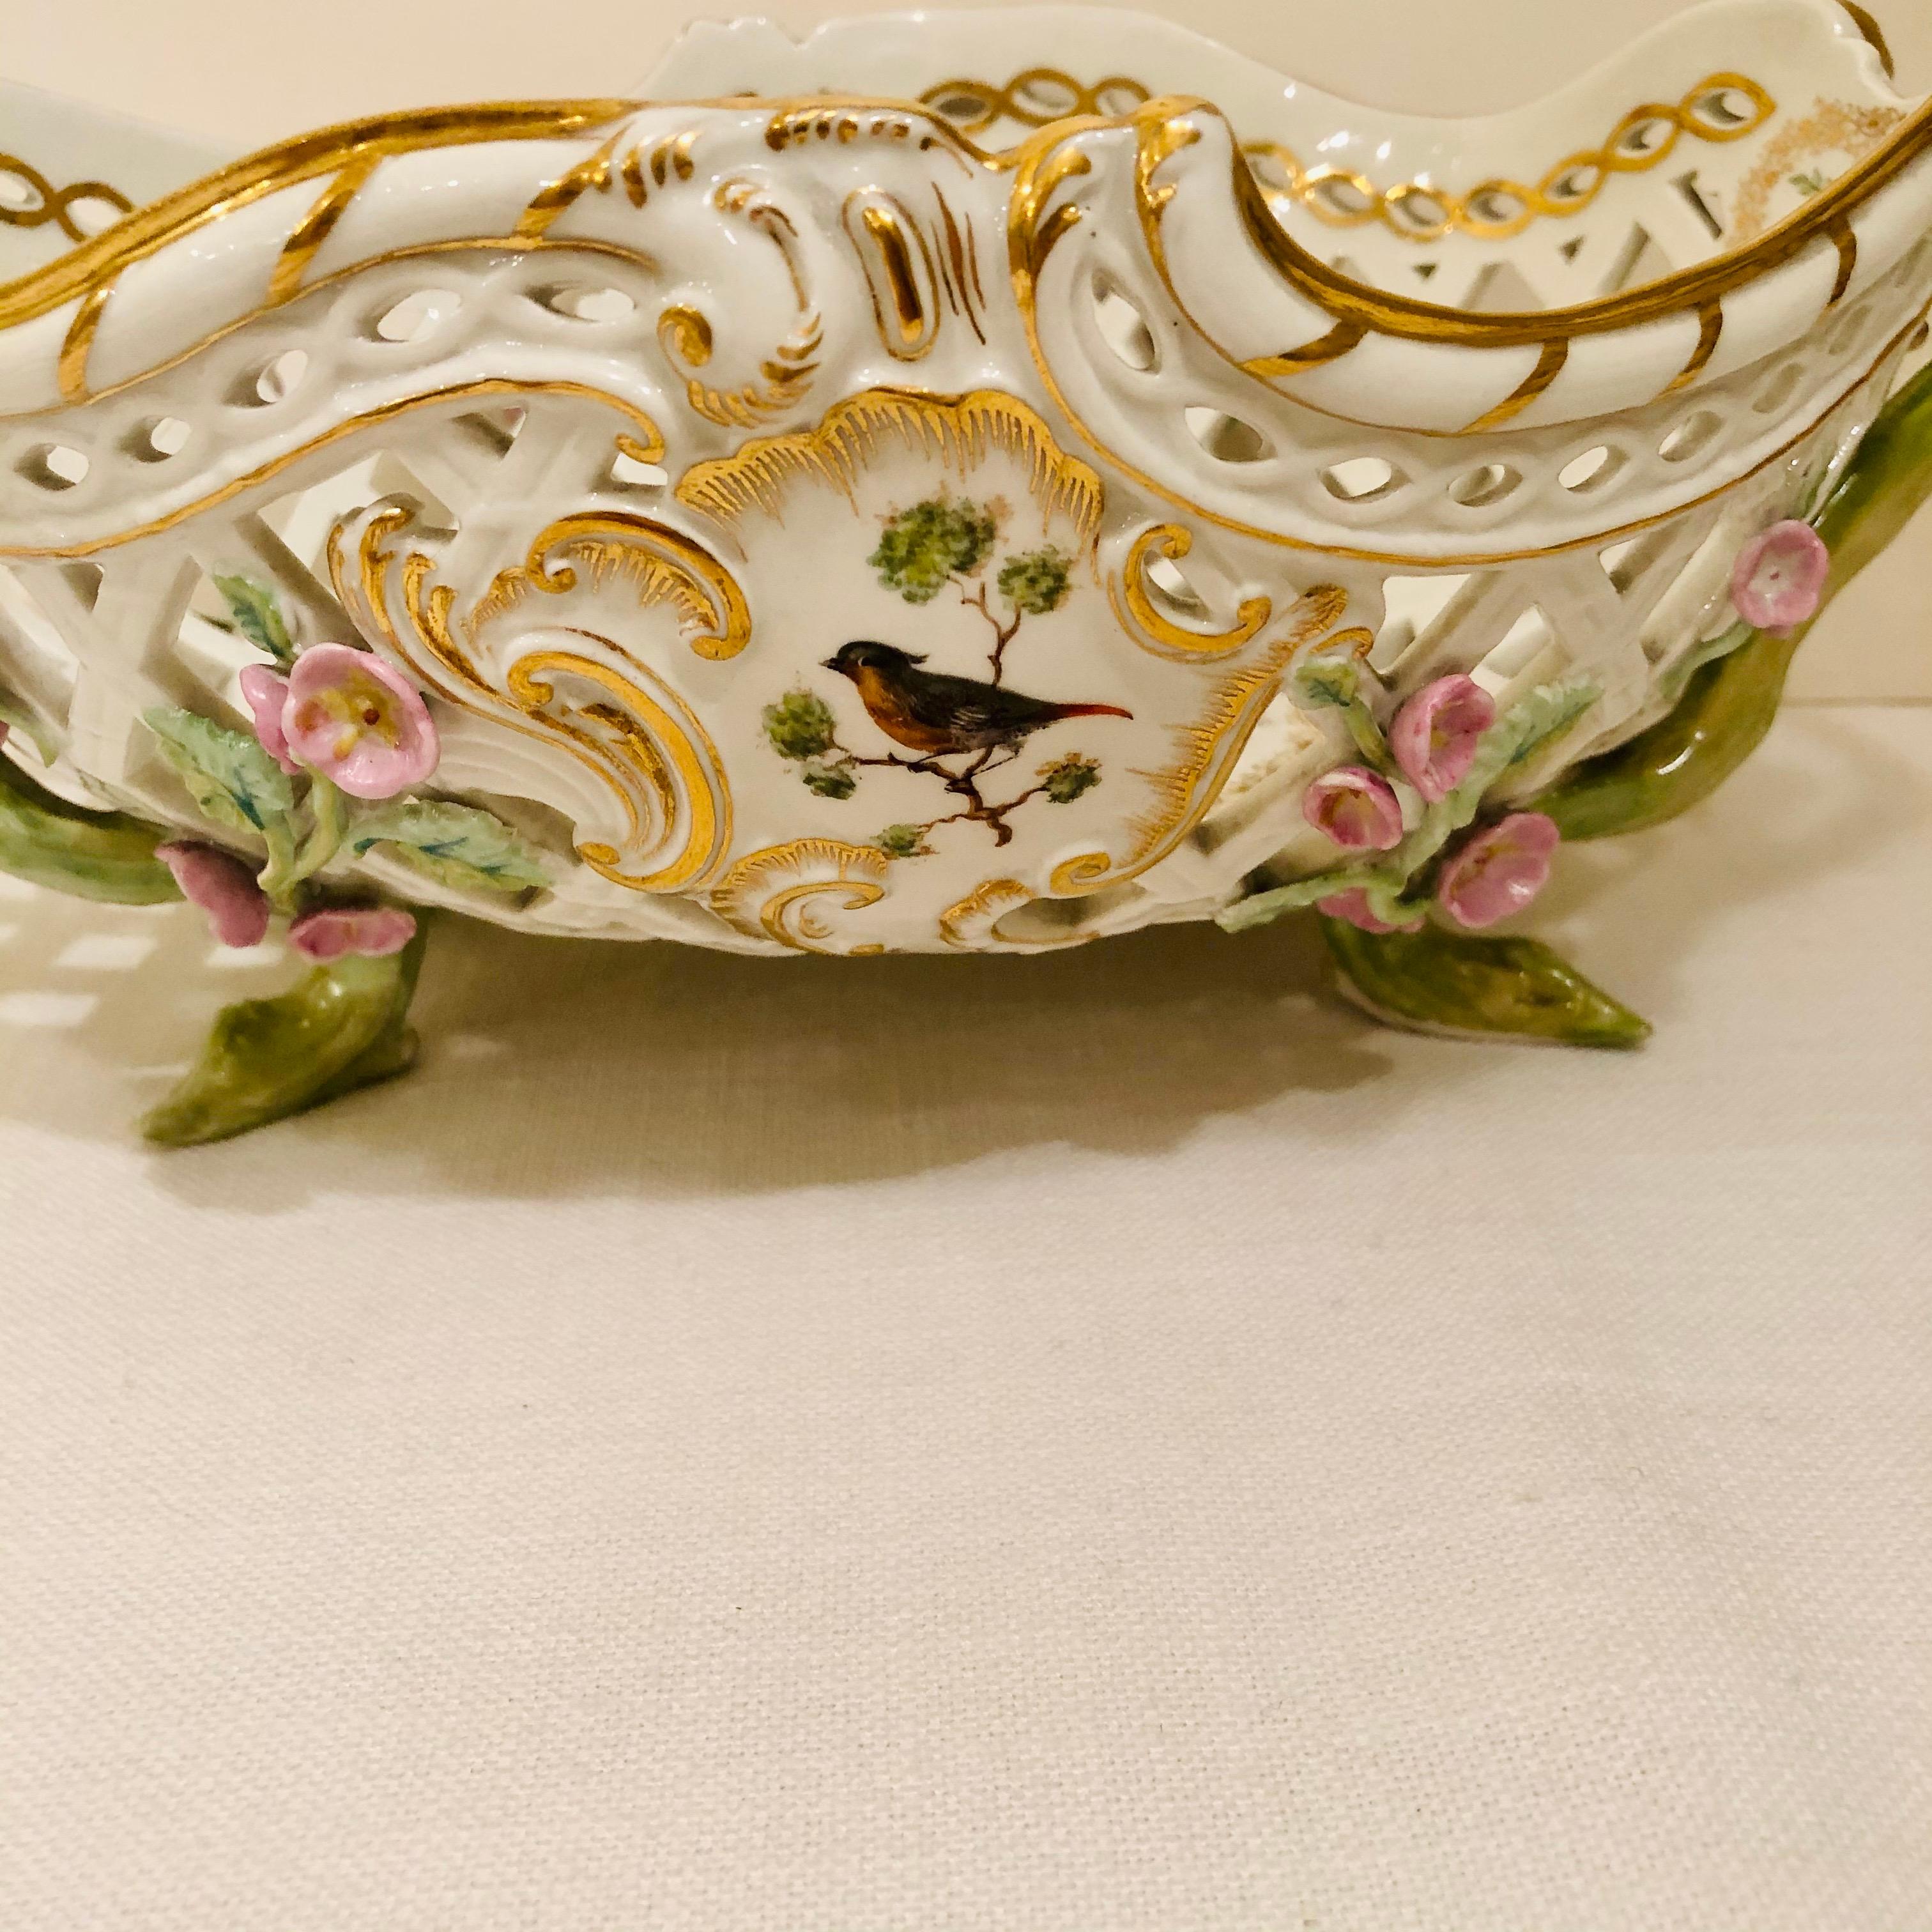 KPM Openwork Bowl with Raised Pink Flowers and Painted Birds on Both Sides For Sale 11